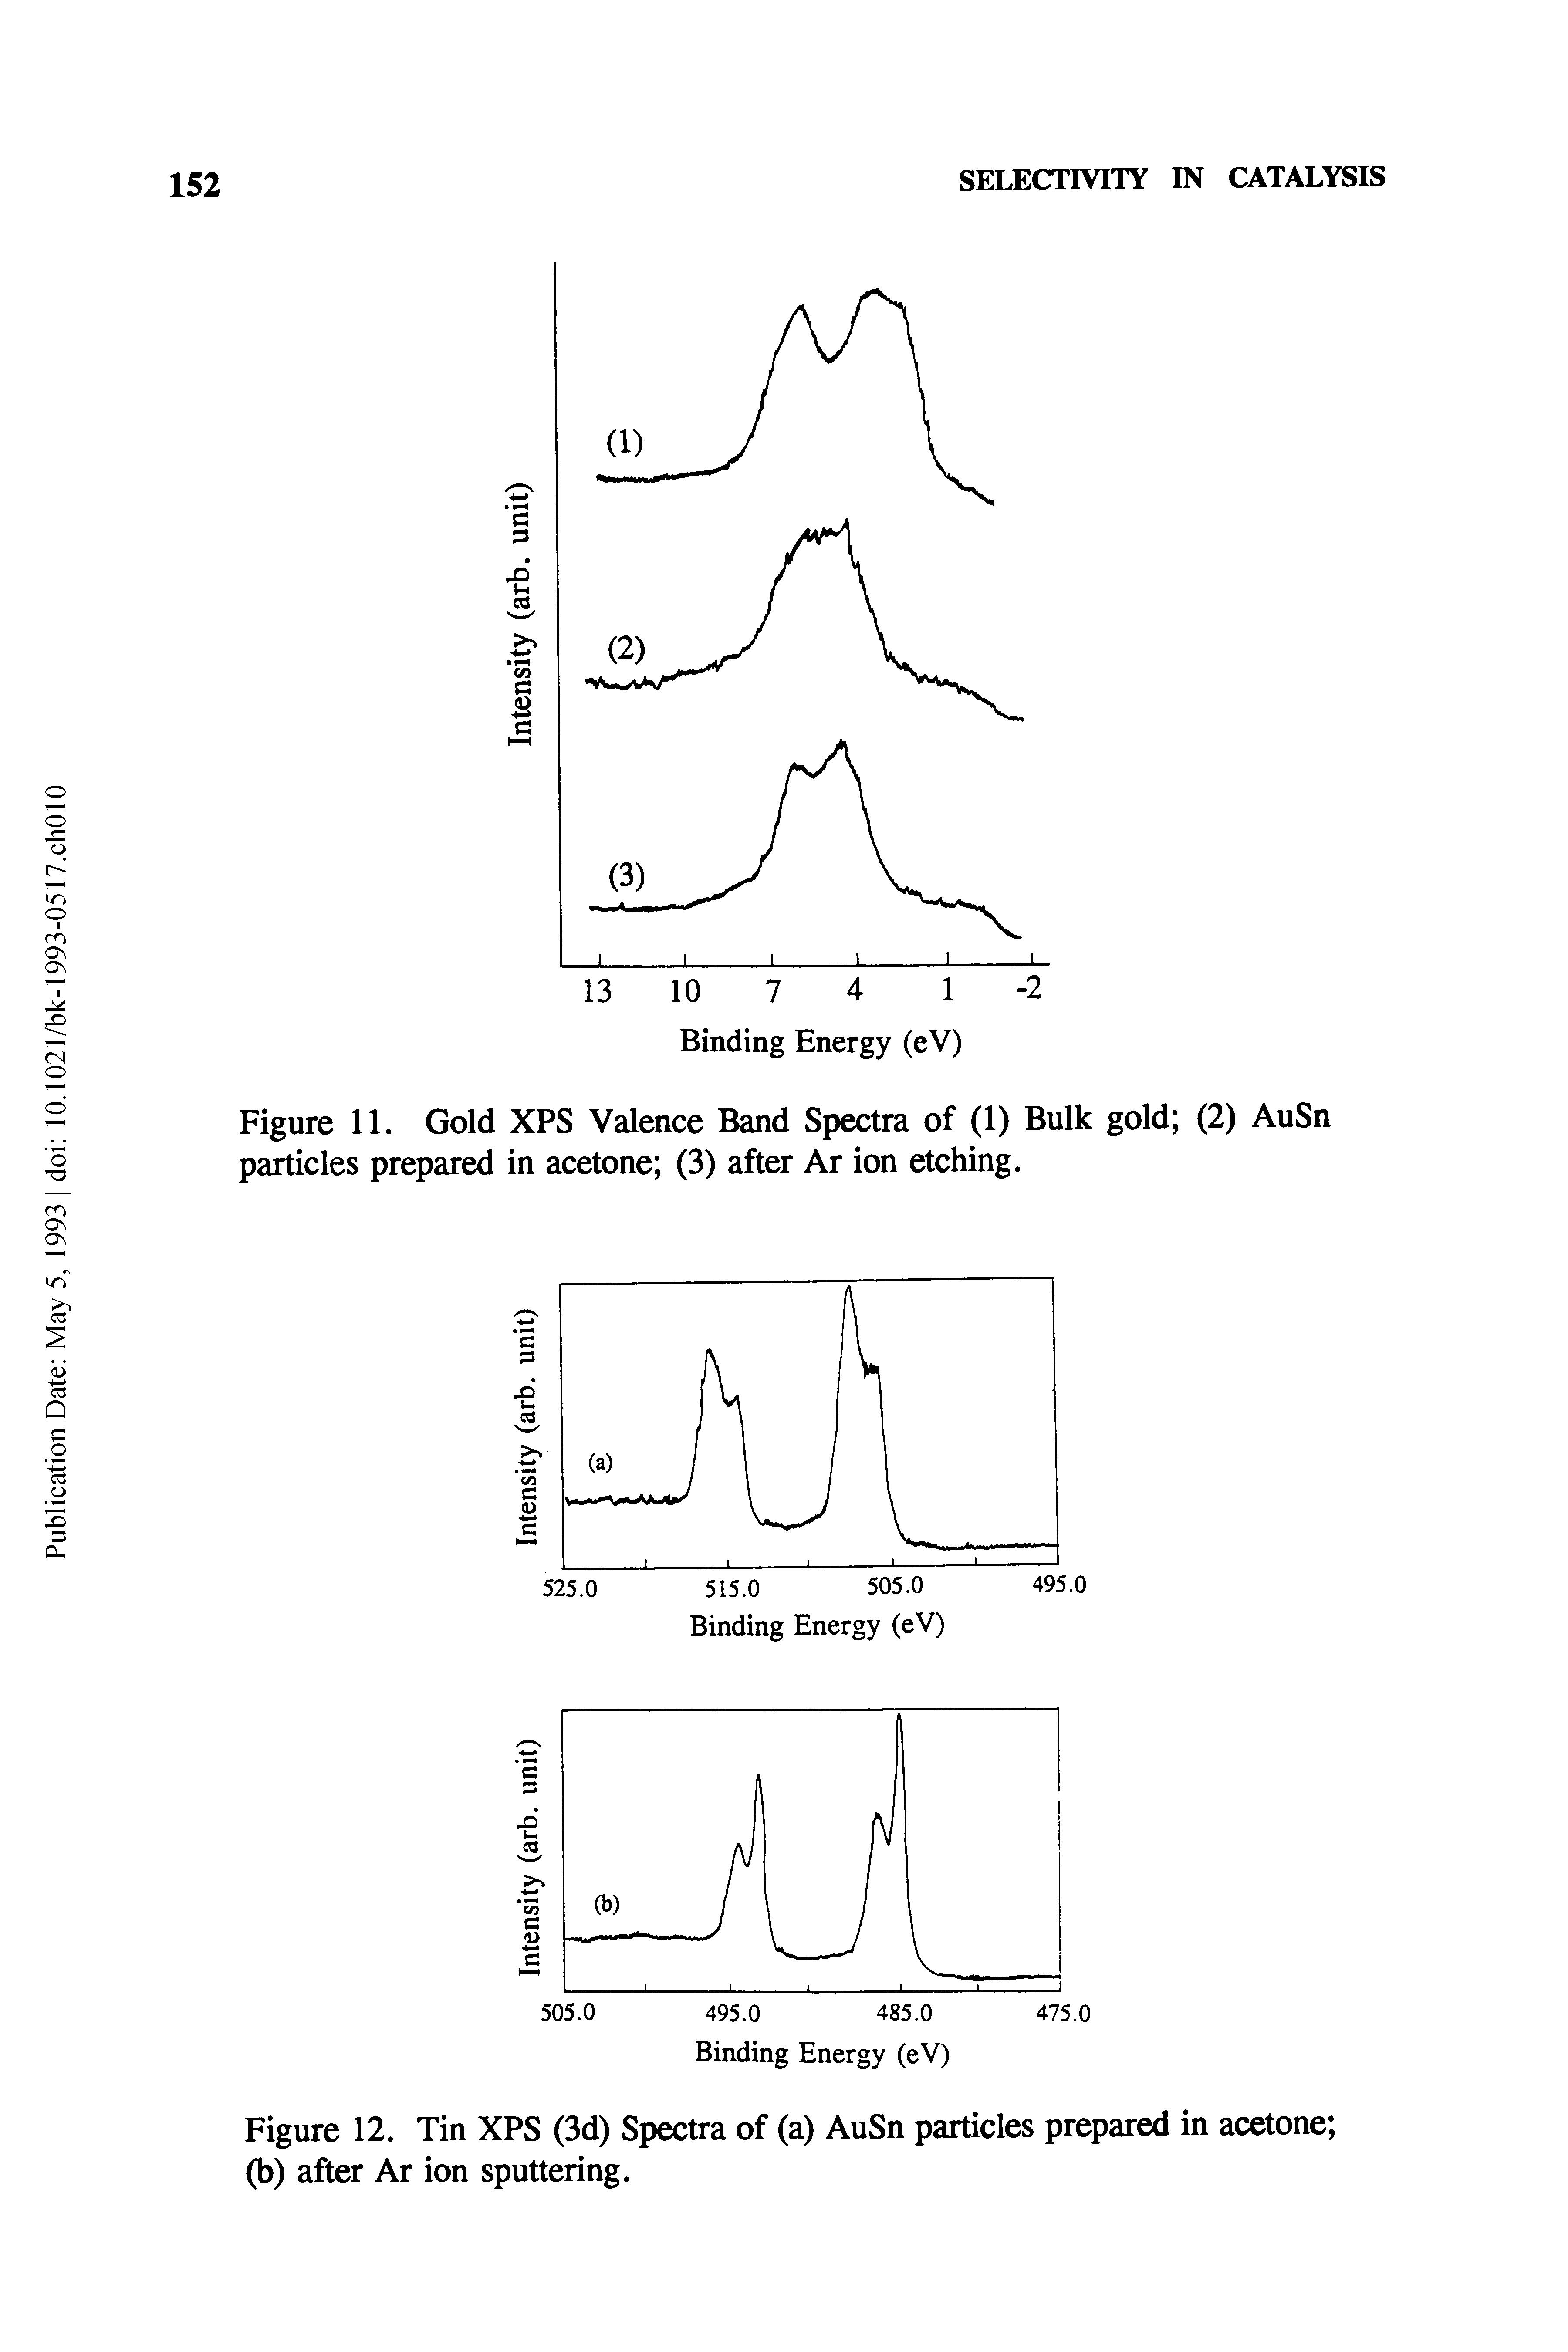 Figure 12. Tin XPS (3d) Spectra of (a) AuSn particles prepared in acetone (b) after Ar ion sputtering.